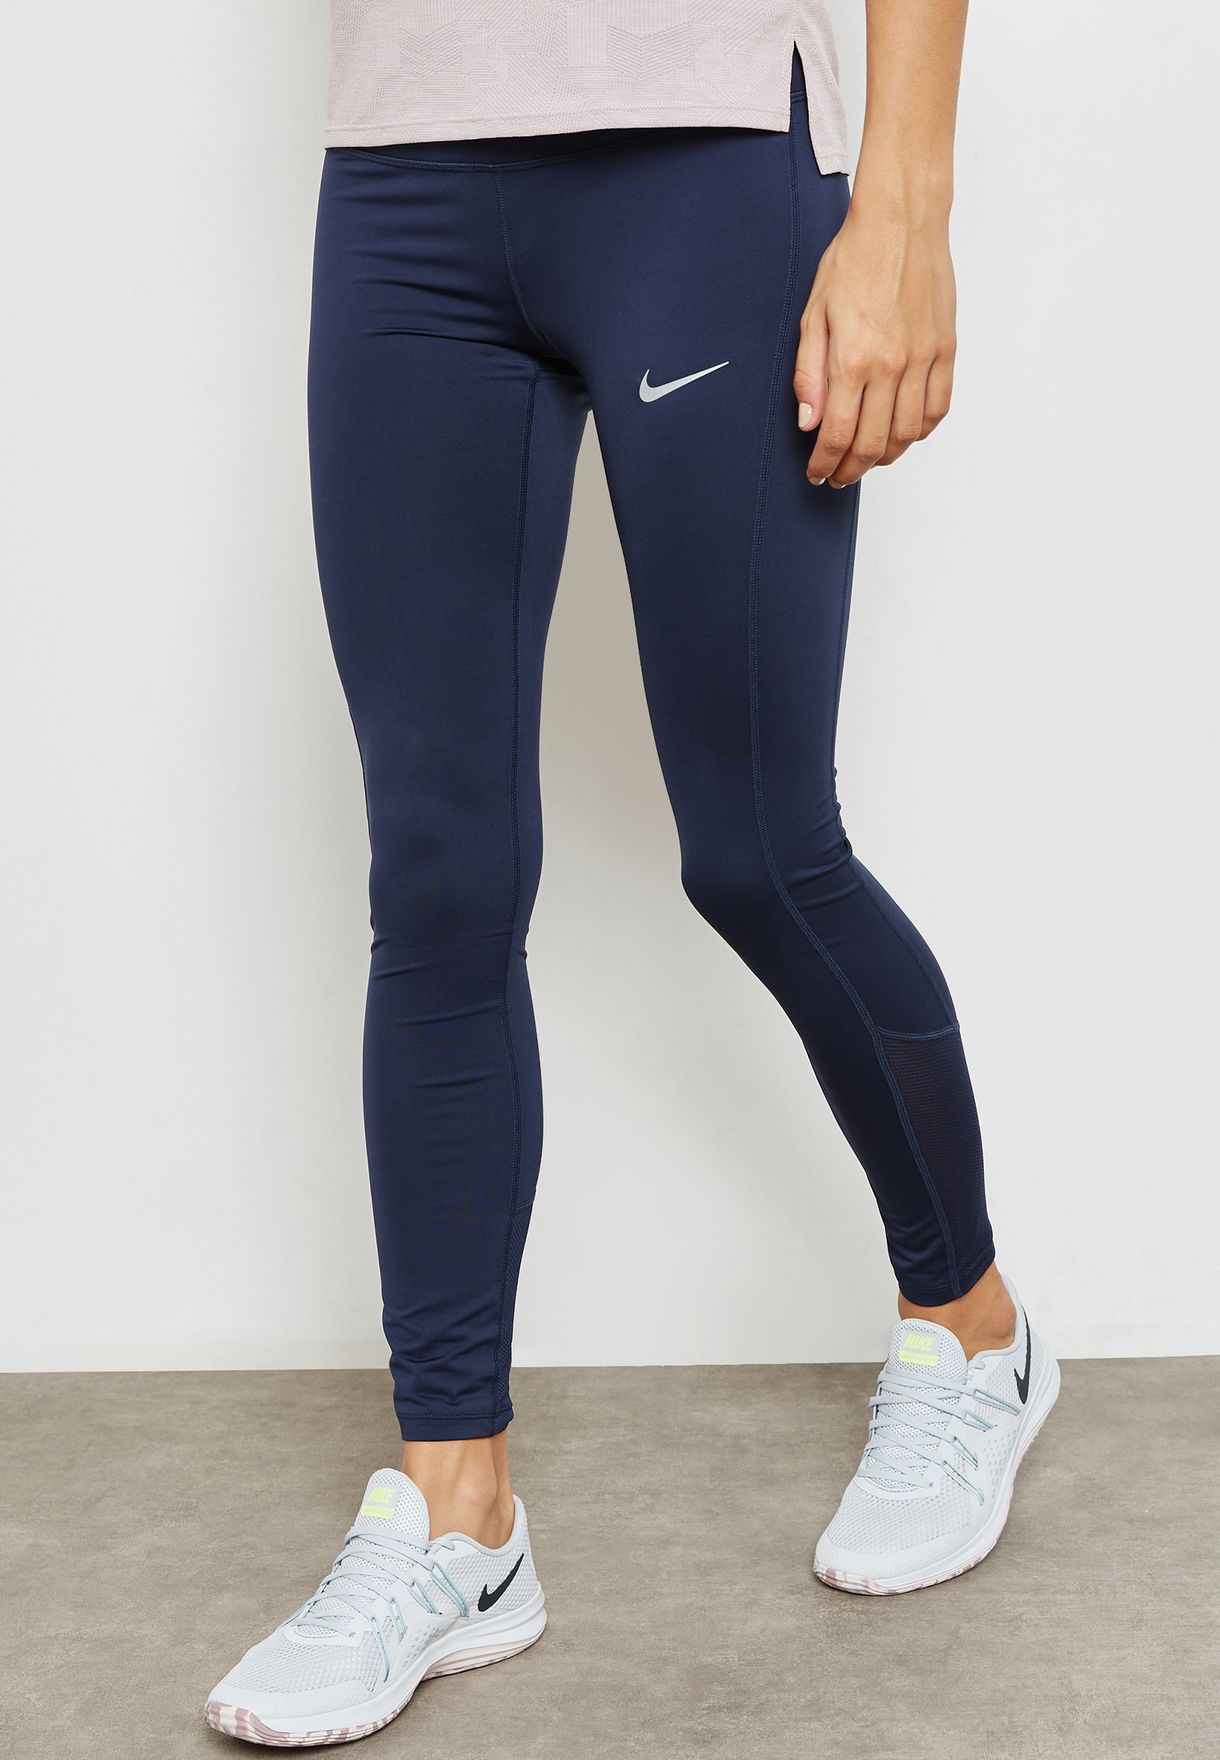 Buy Nike navy Power Racer Tights for 